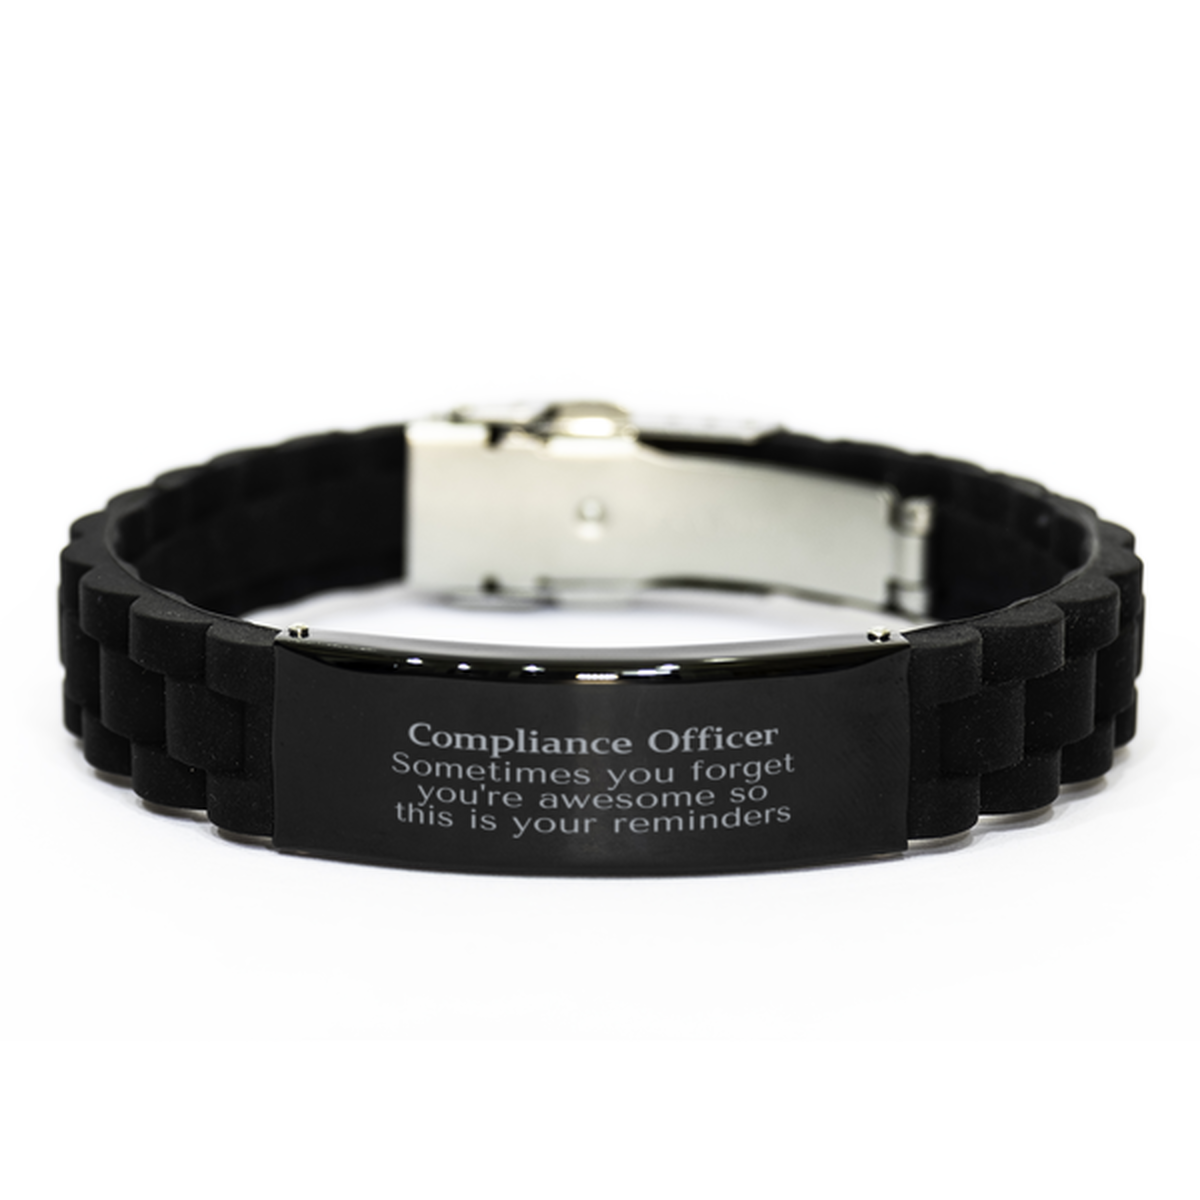 Sentimental Compliance Officer Black Glidelock Clasp Bracelet, Compliance Officer Sometimes you forget you're awesome so this is your reminders, Graduation Christmas Birthday Gifts for Compliance Officer, Men, Women, Coworkers